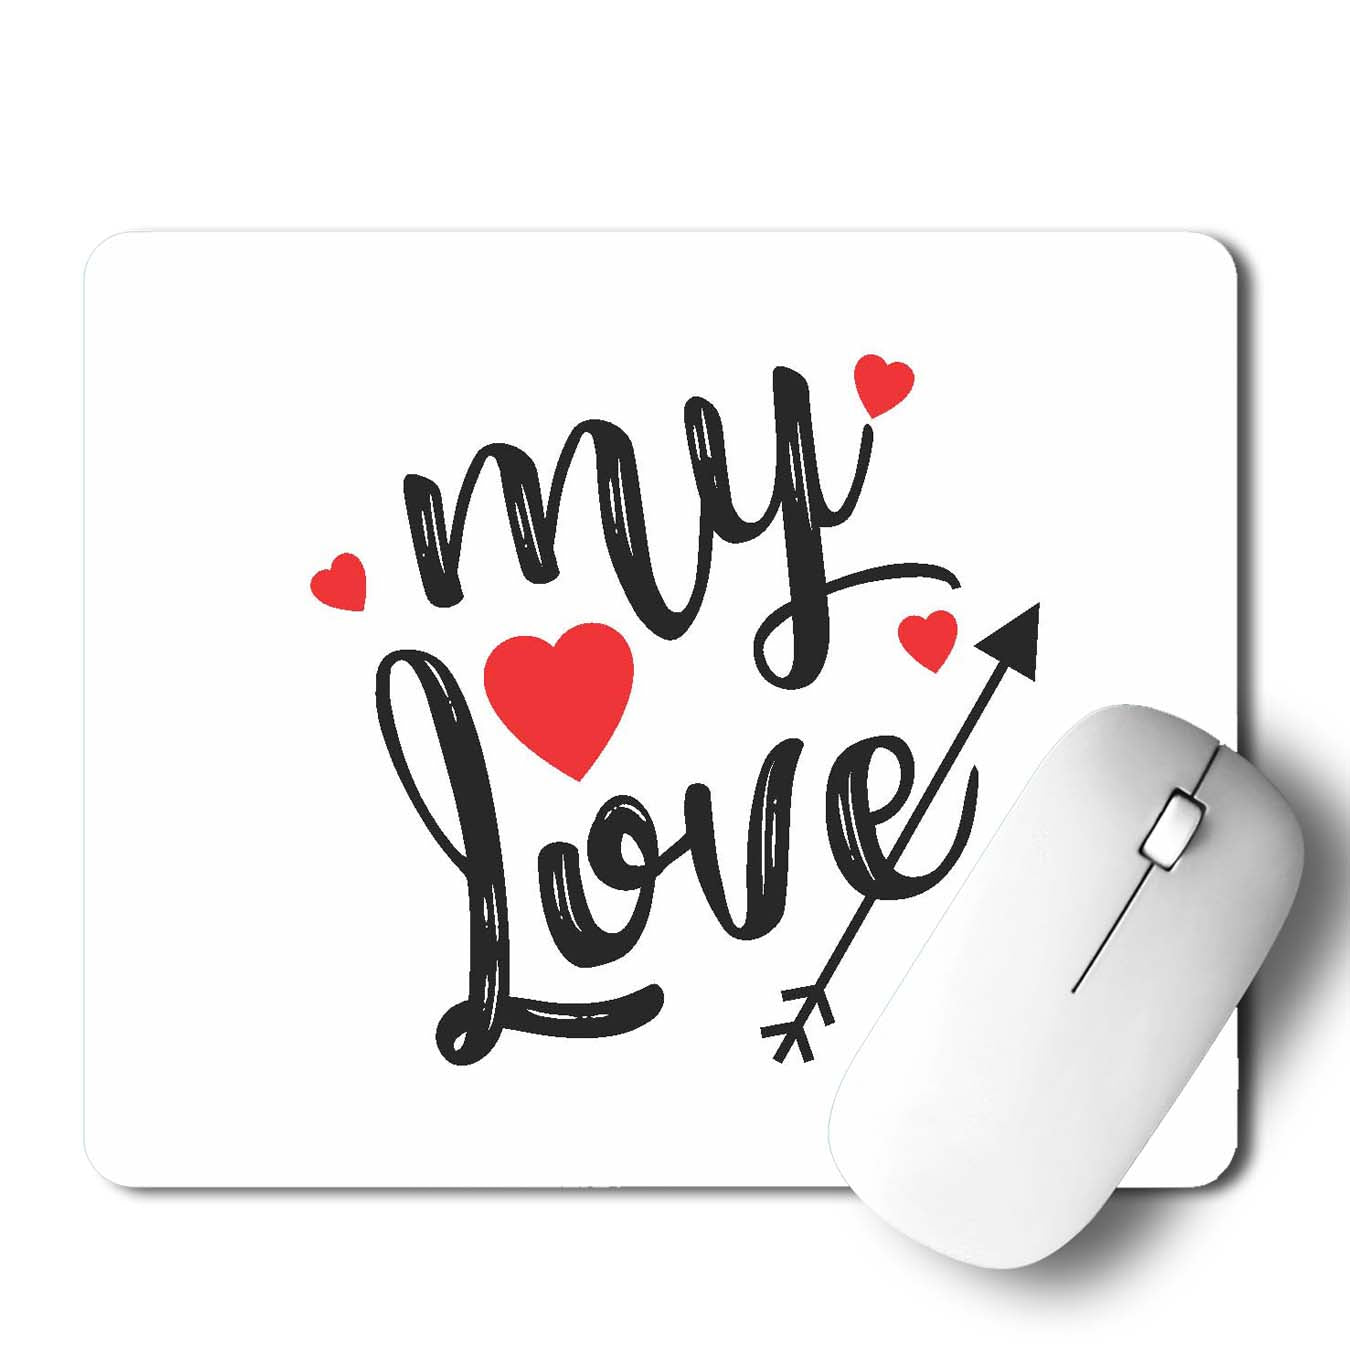 My Love  Mouse Pad